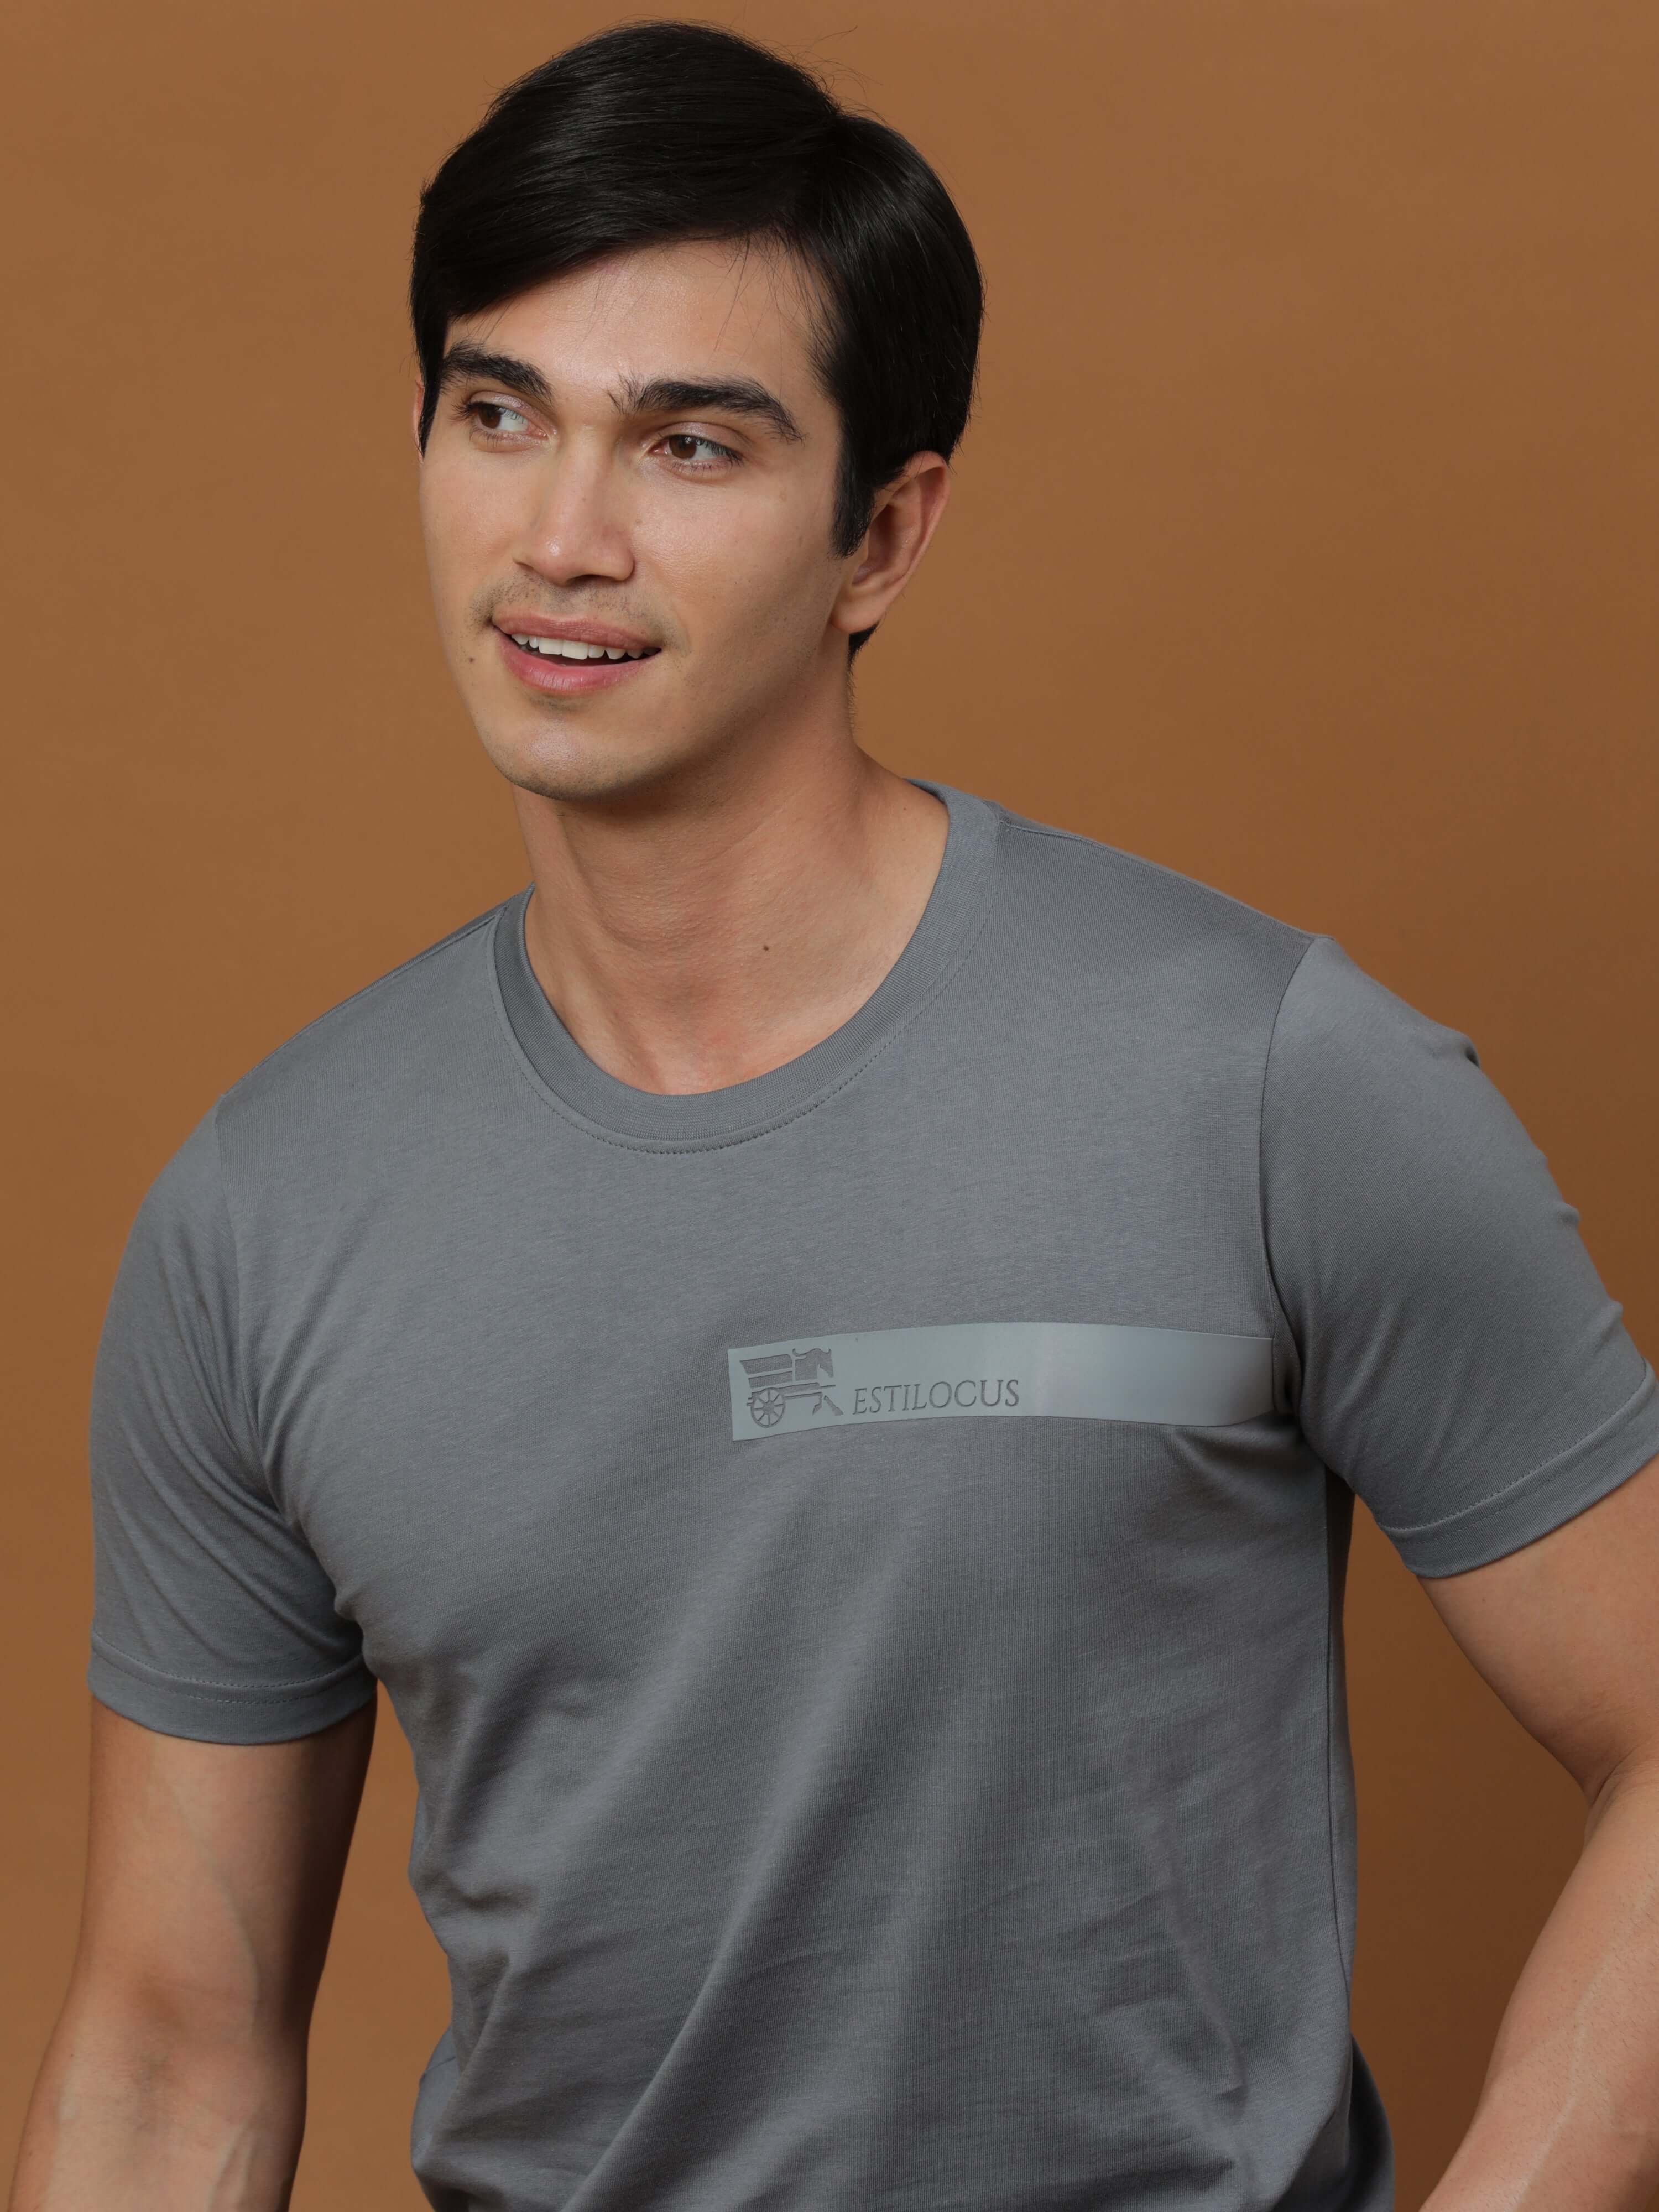 Gunmetal Grey Hd Printed Logo T Shirt shop online at Estilocus. 100% Cotton Designed and printed on knitted fabric. The fabric is stretchy and lightweight, with a soft skin feel and no wrinkles. Crew neck collar which is smooth on the neck and keeps you c